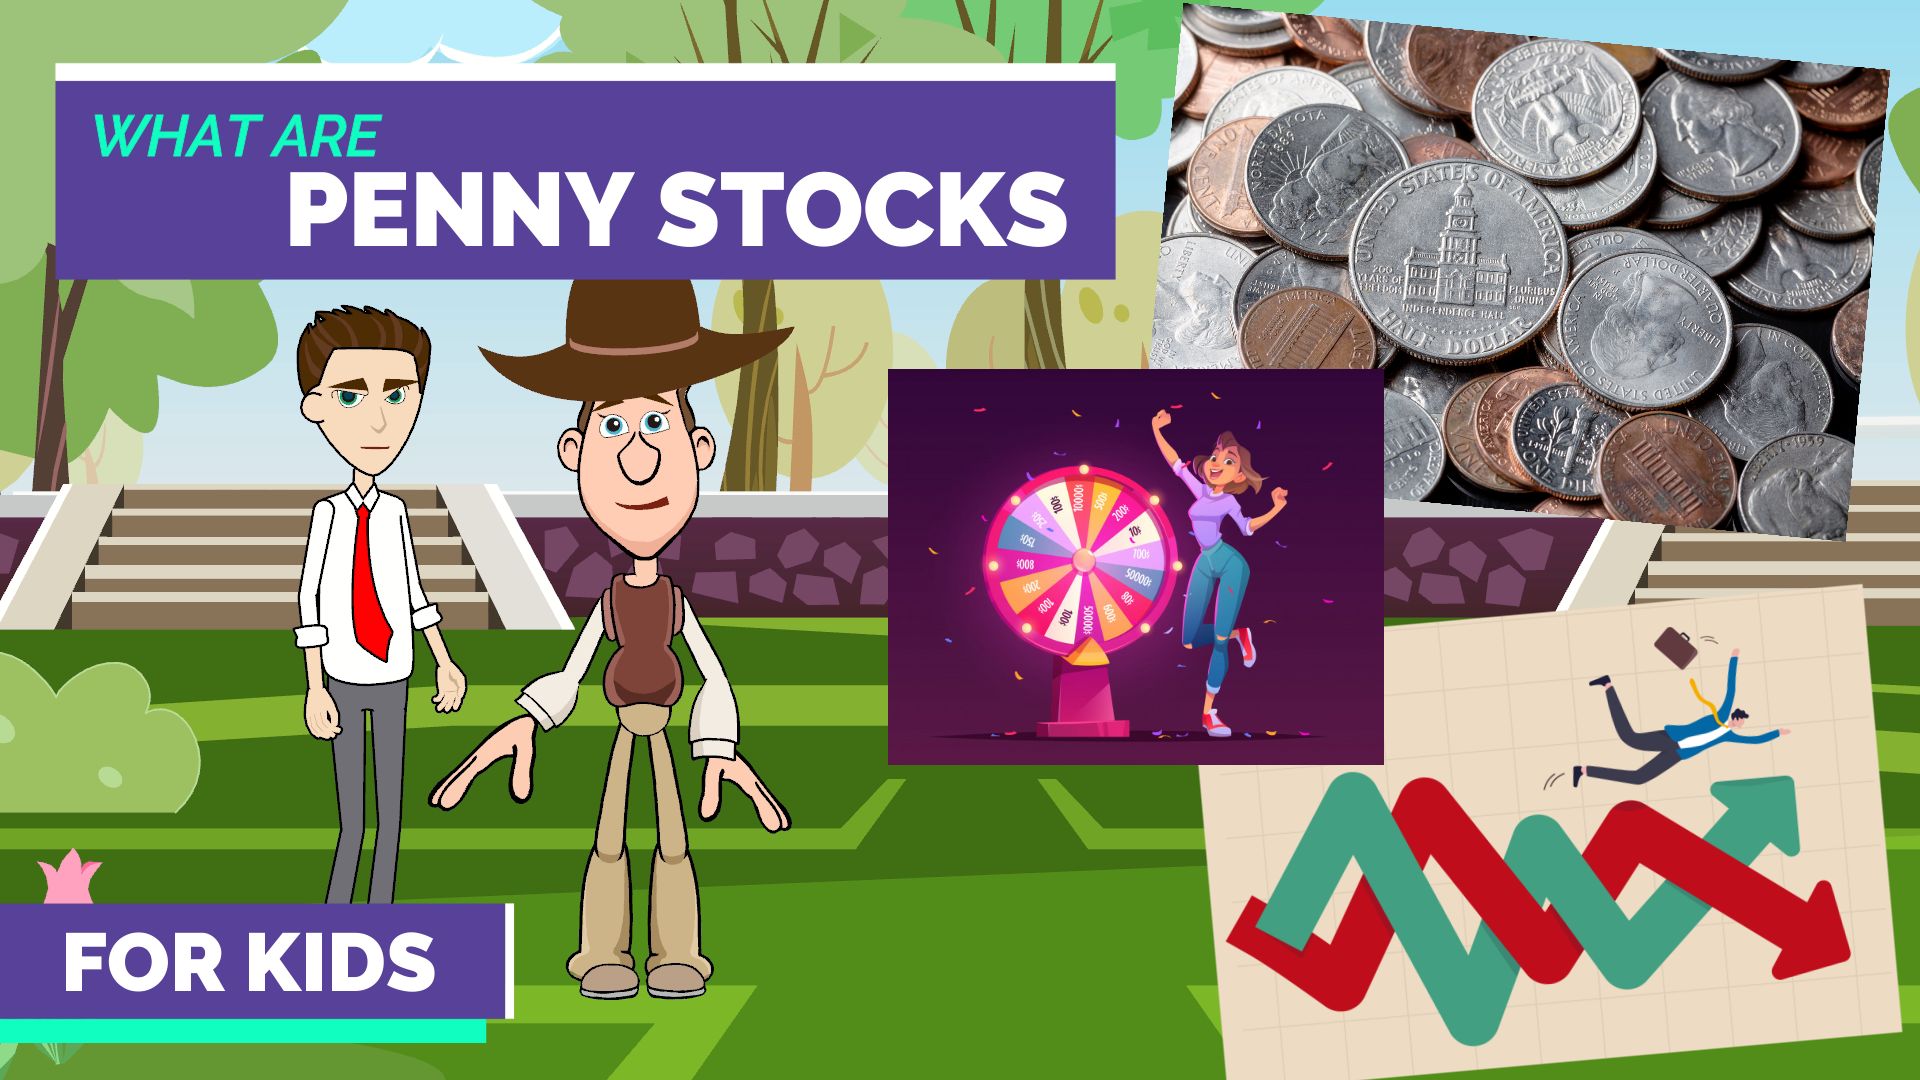 What are Penny Stocks for Kids